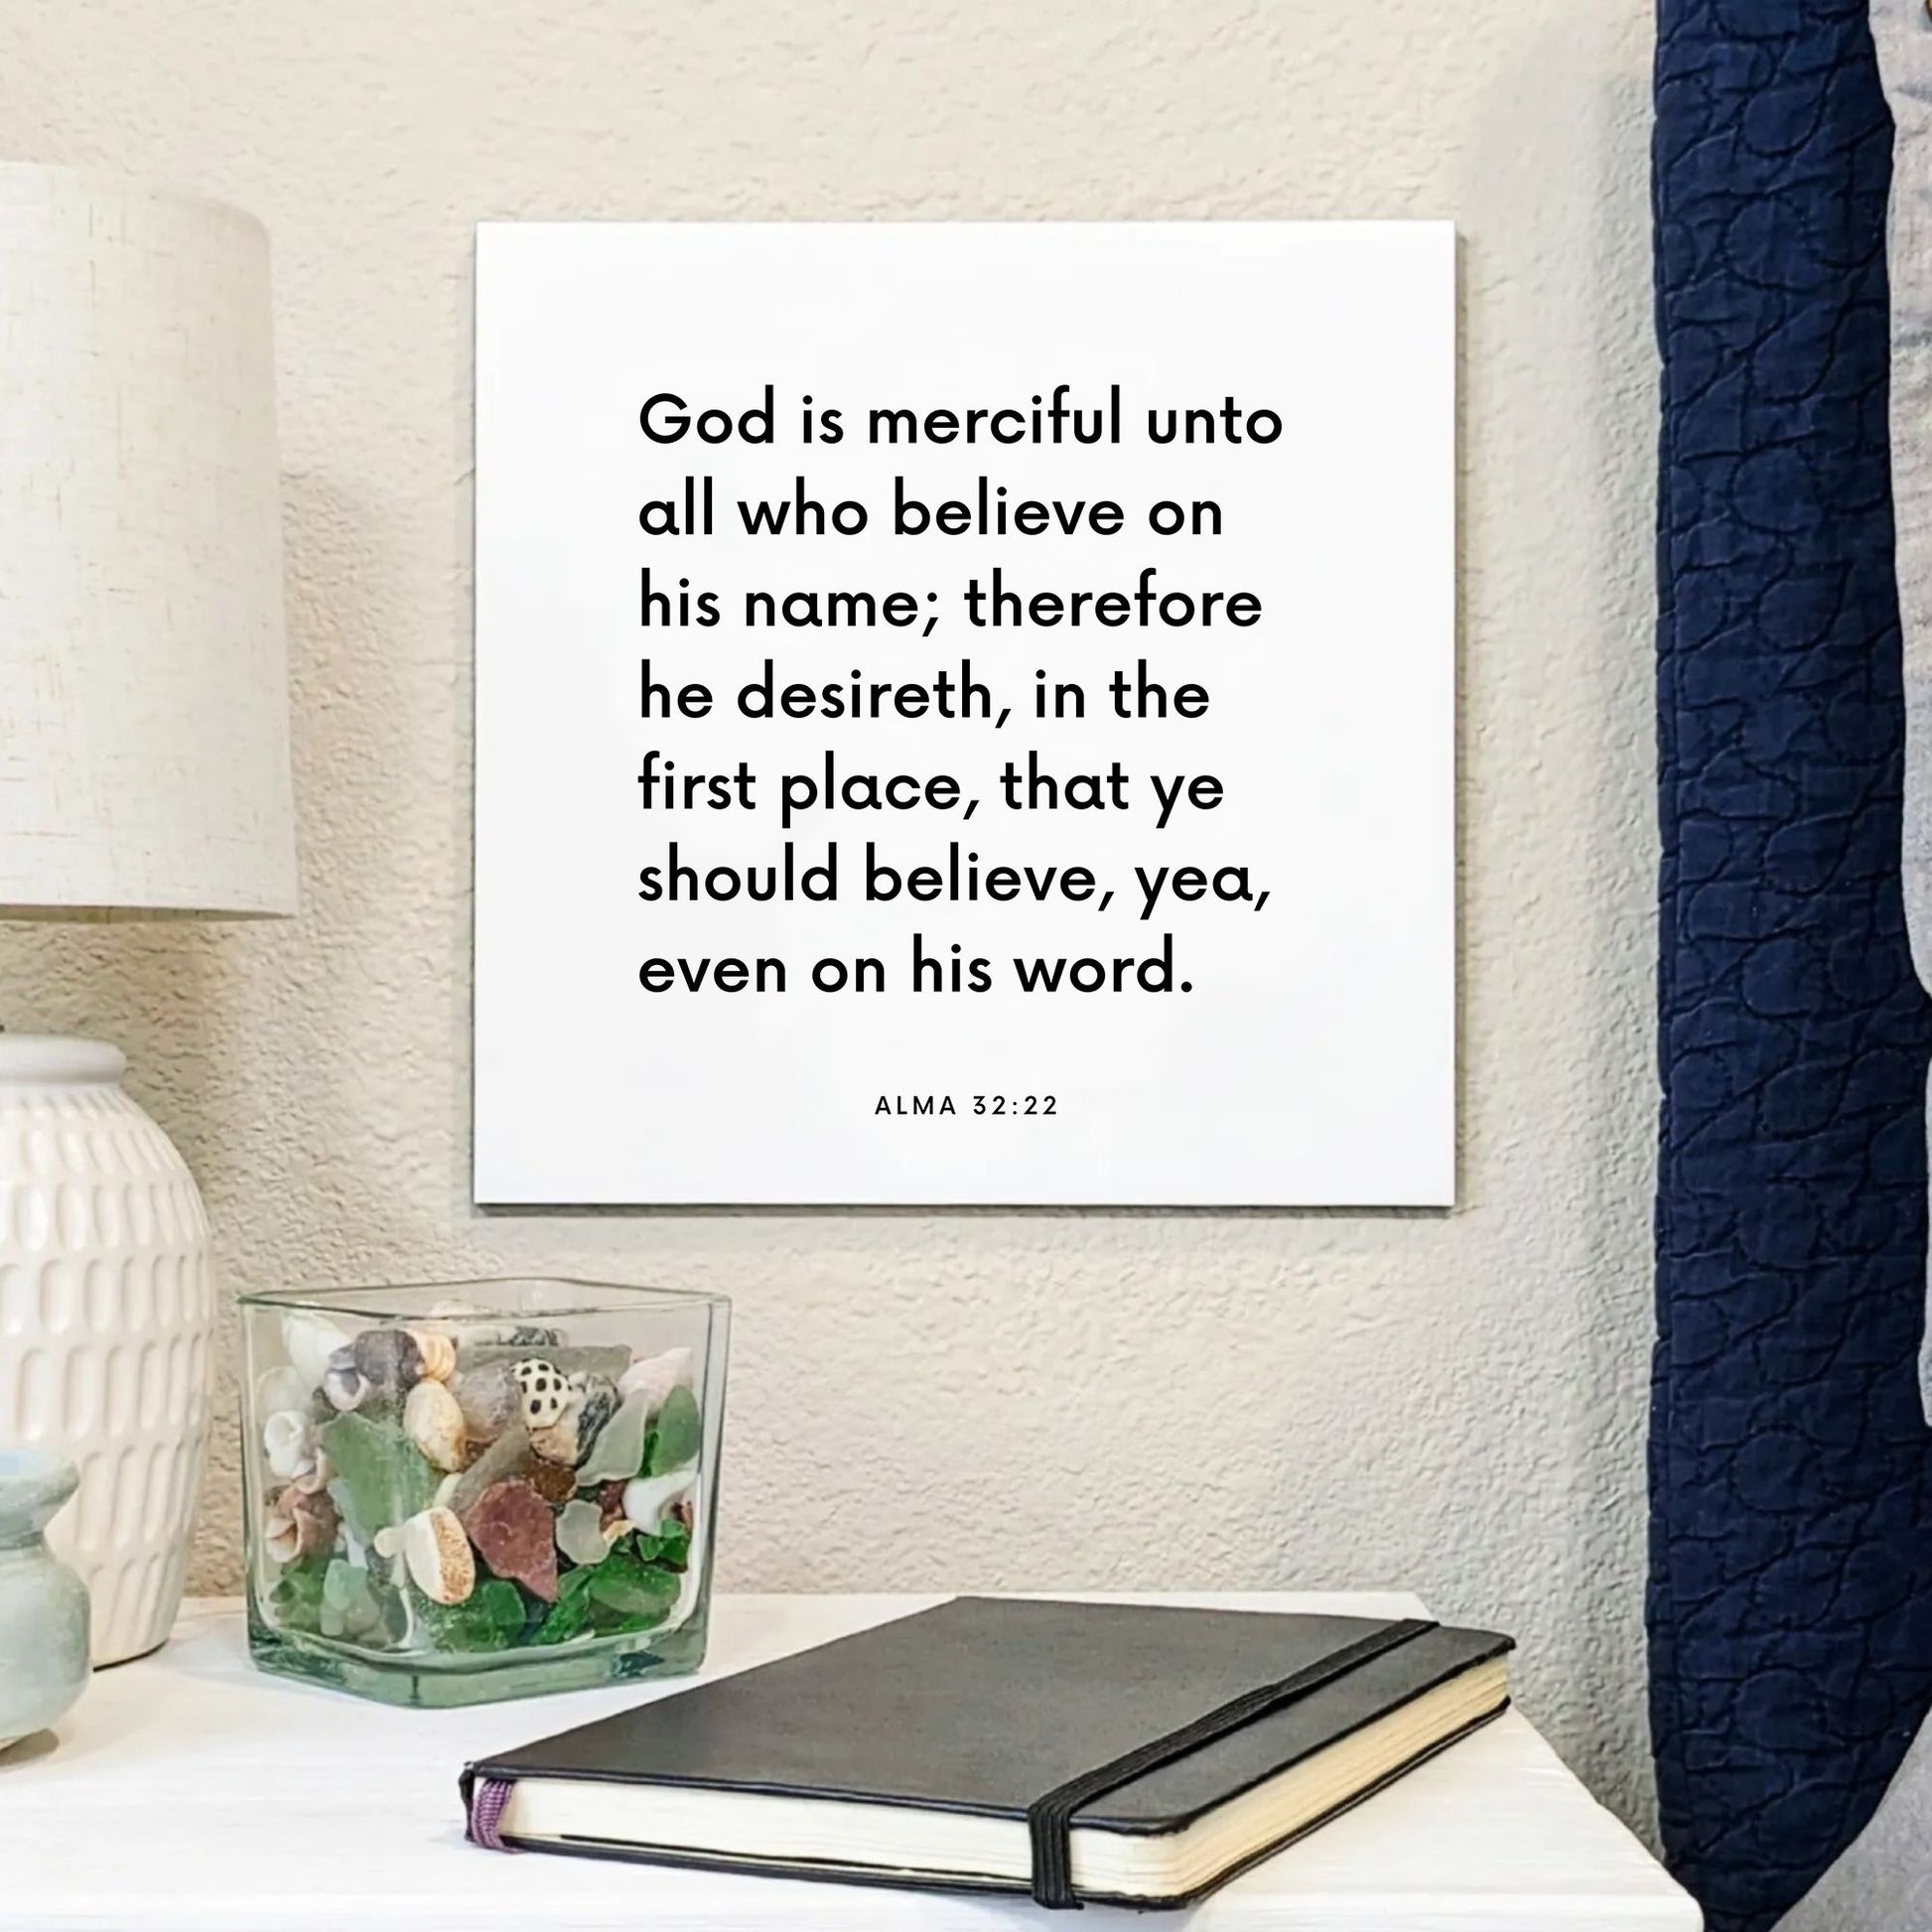 Bedside mouting of the scripture tile for Alma 32:22 - "God is merciful unto all who believe on his name"